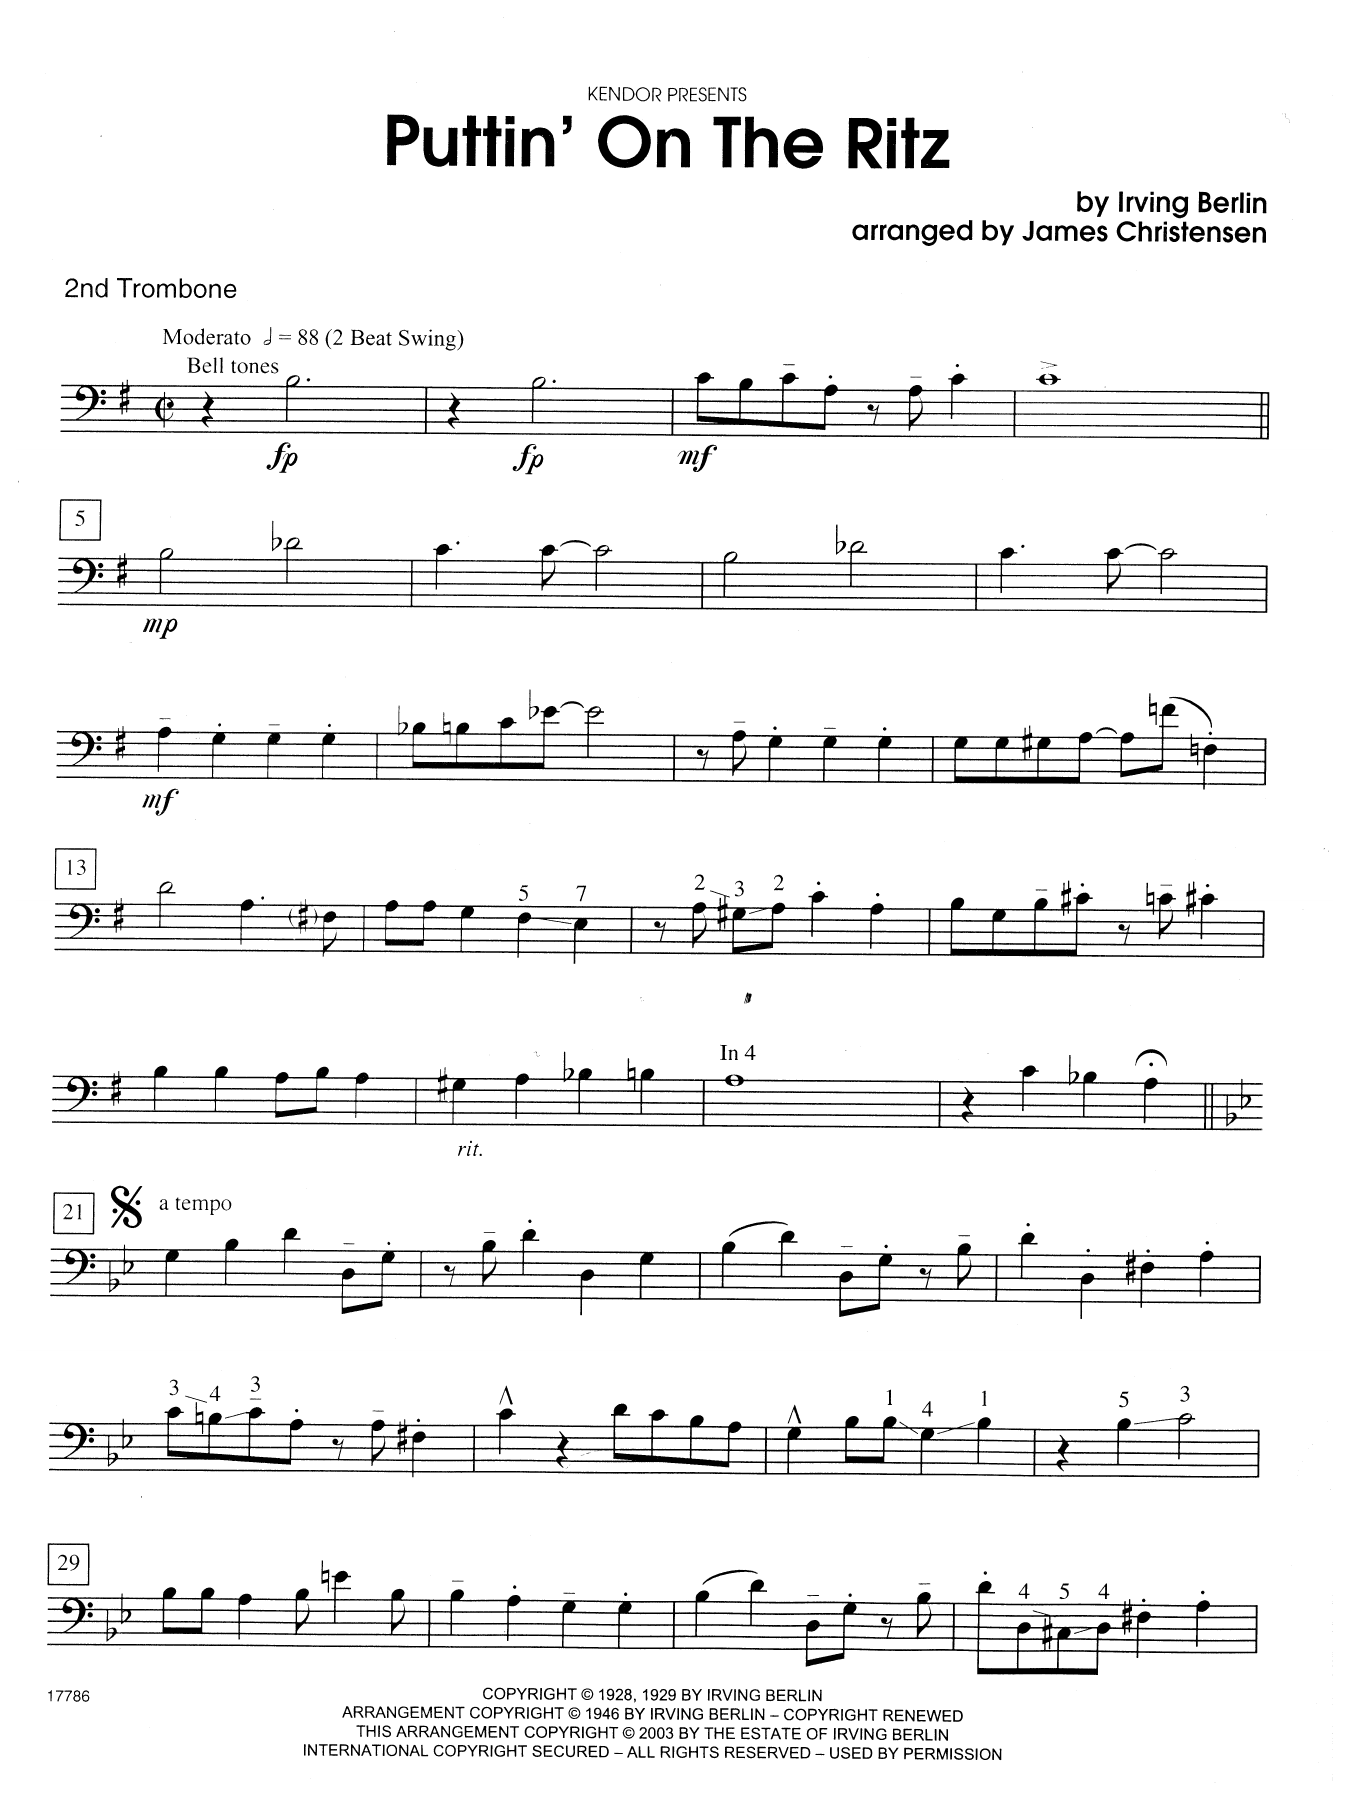 James Christensen Puttin' on the Ritz - 2nd Trombone sheet music notes and chords. Download Printable PDF.